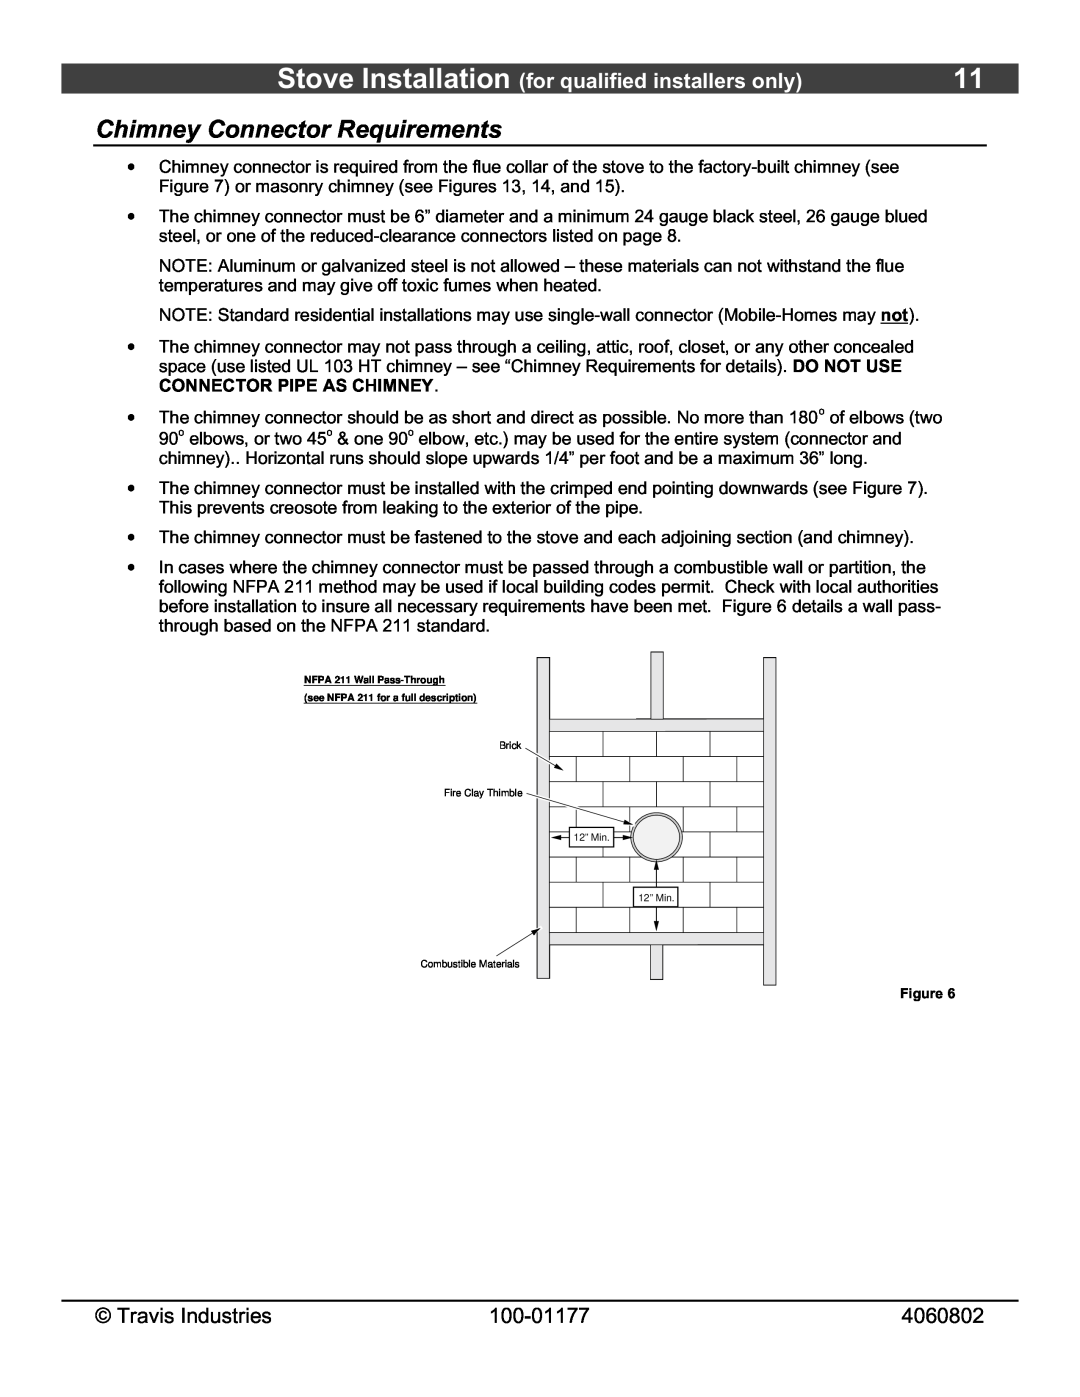 Lopi 028-S-75-2 owner manual Chimney Connector Requirements, Stove Installation for qualified installers only 